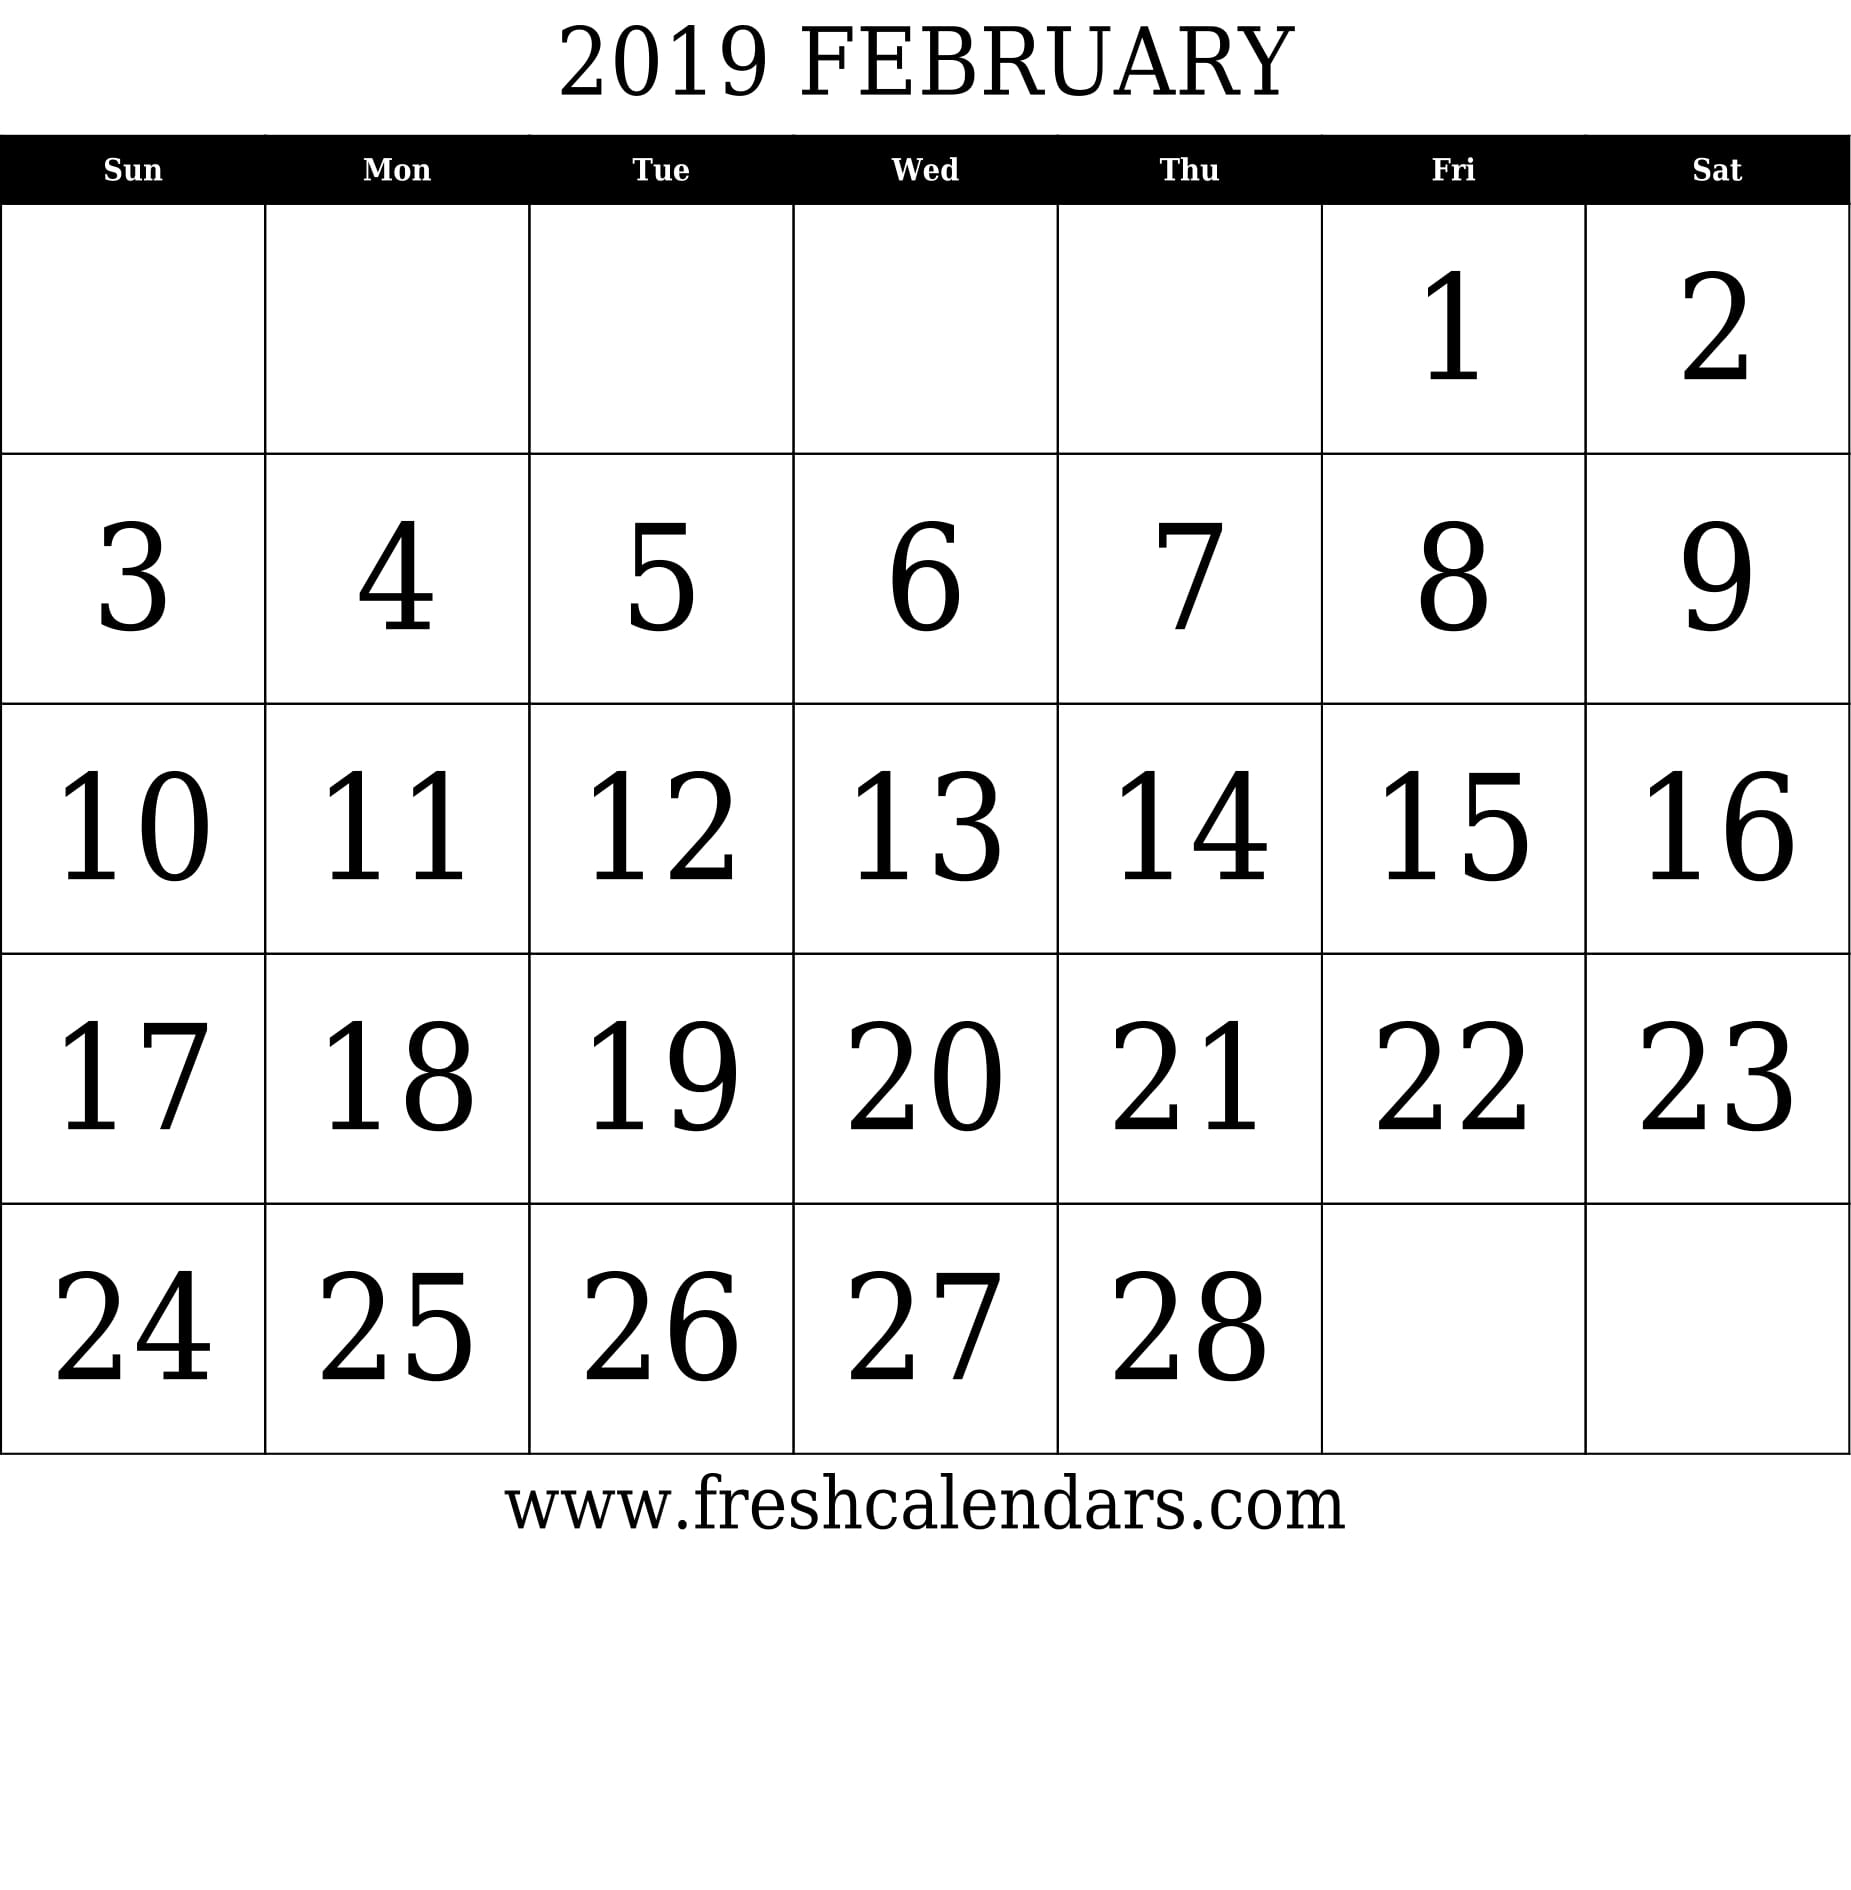 February 2019 Calendar With Large Dates